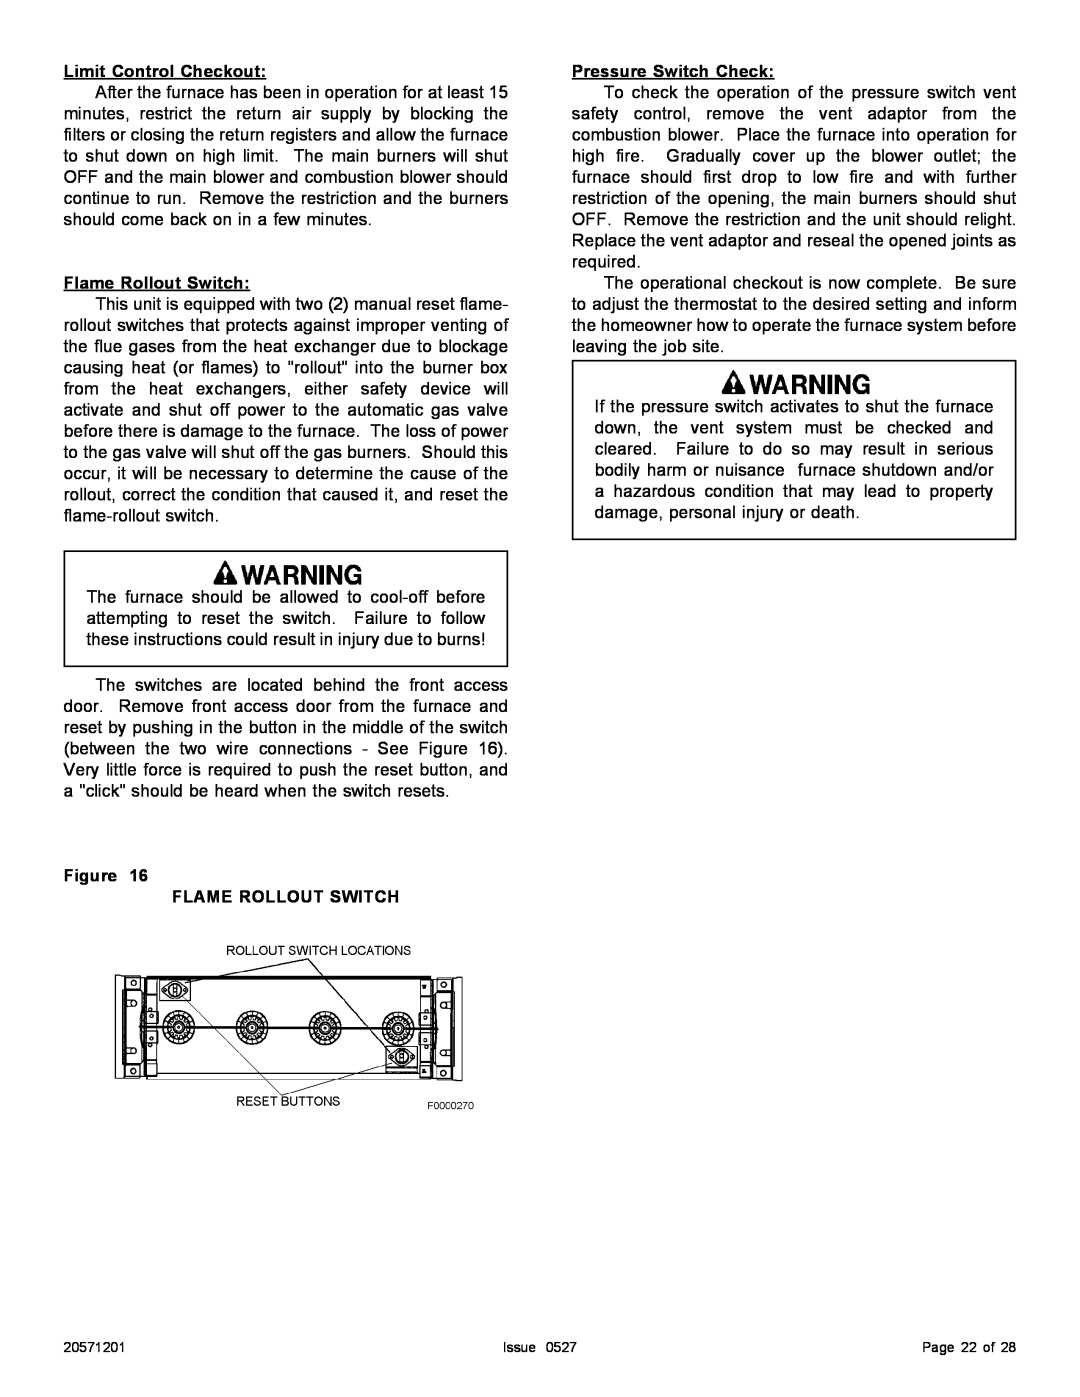 Allied Air Enterprises Upflow Limit Control Checkout, Flame Rollout Switch, Figure FLAME ROLLOUT SWITCH, Issue, Page 22 of 